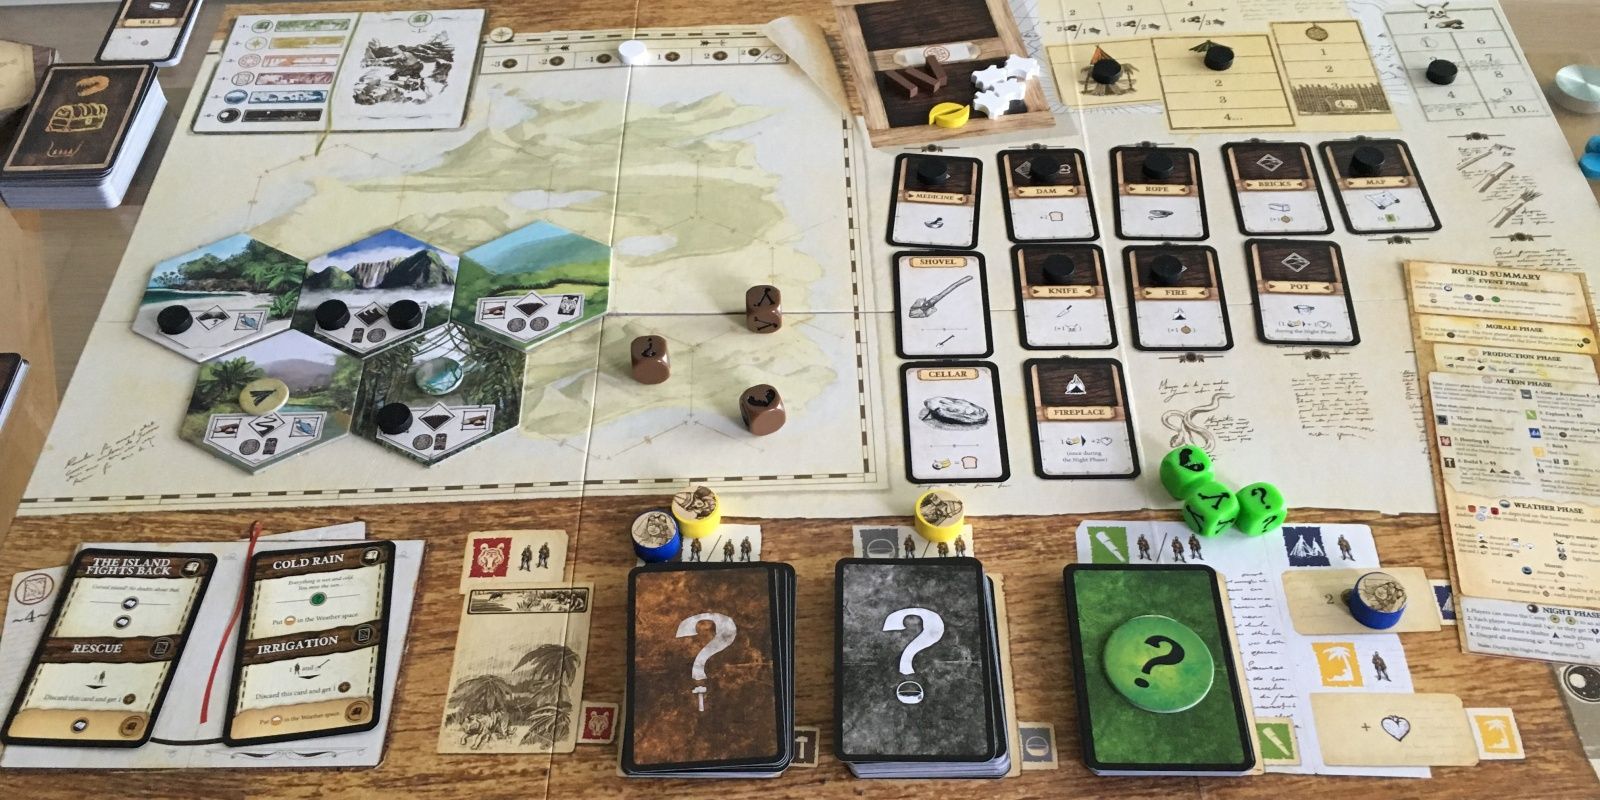 The components of an in-progress game of Robinson Crusoe board game